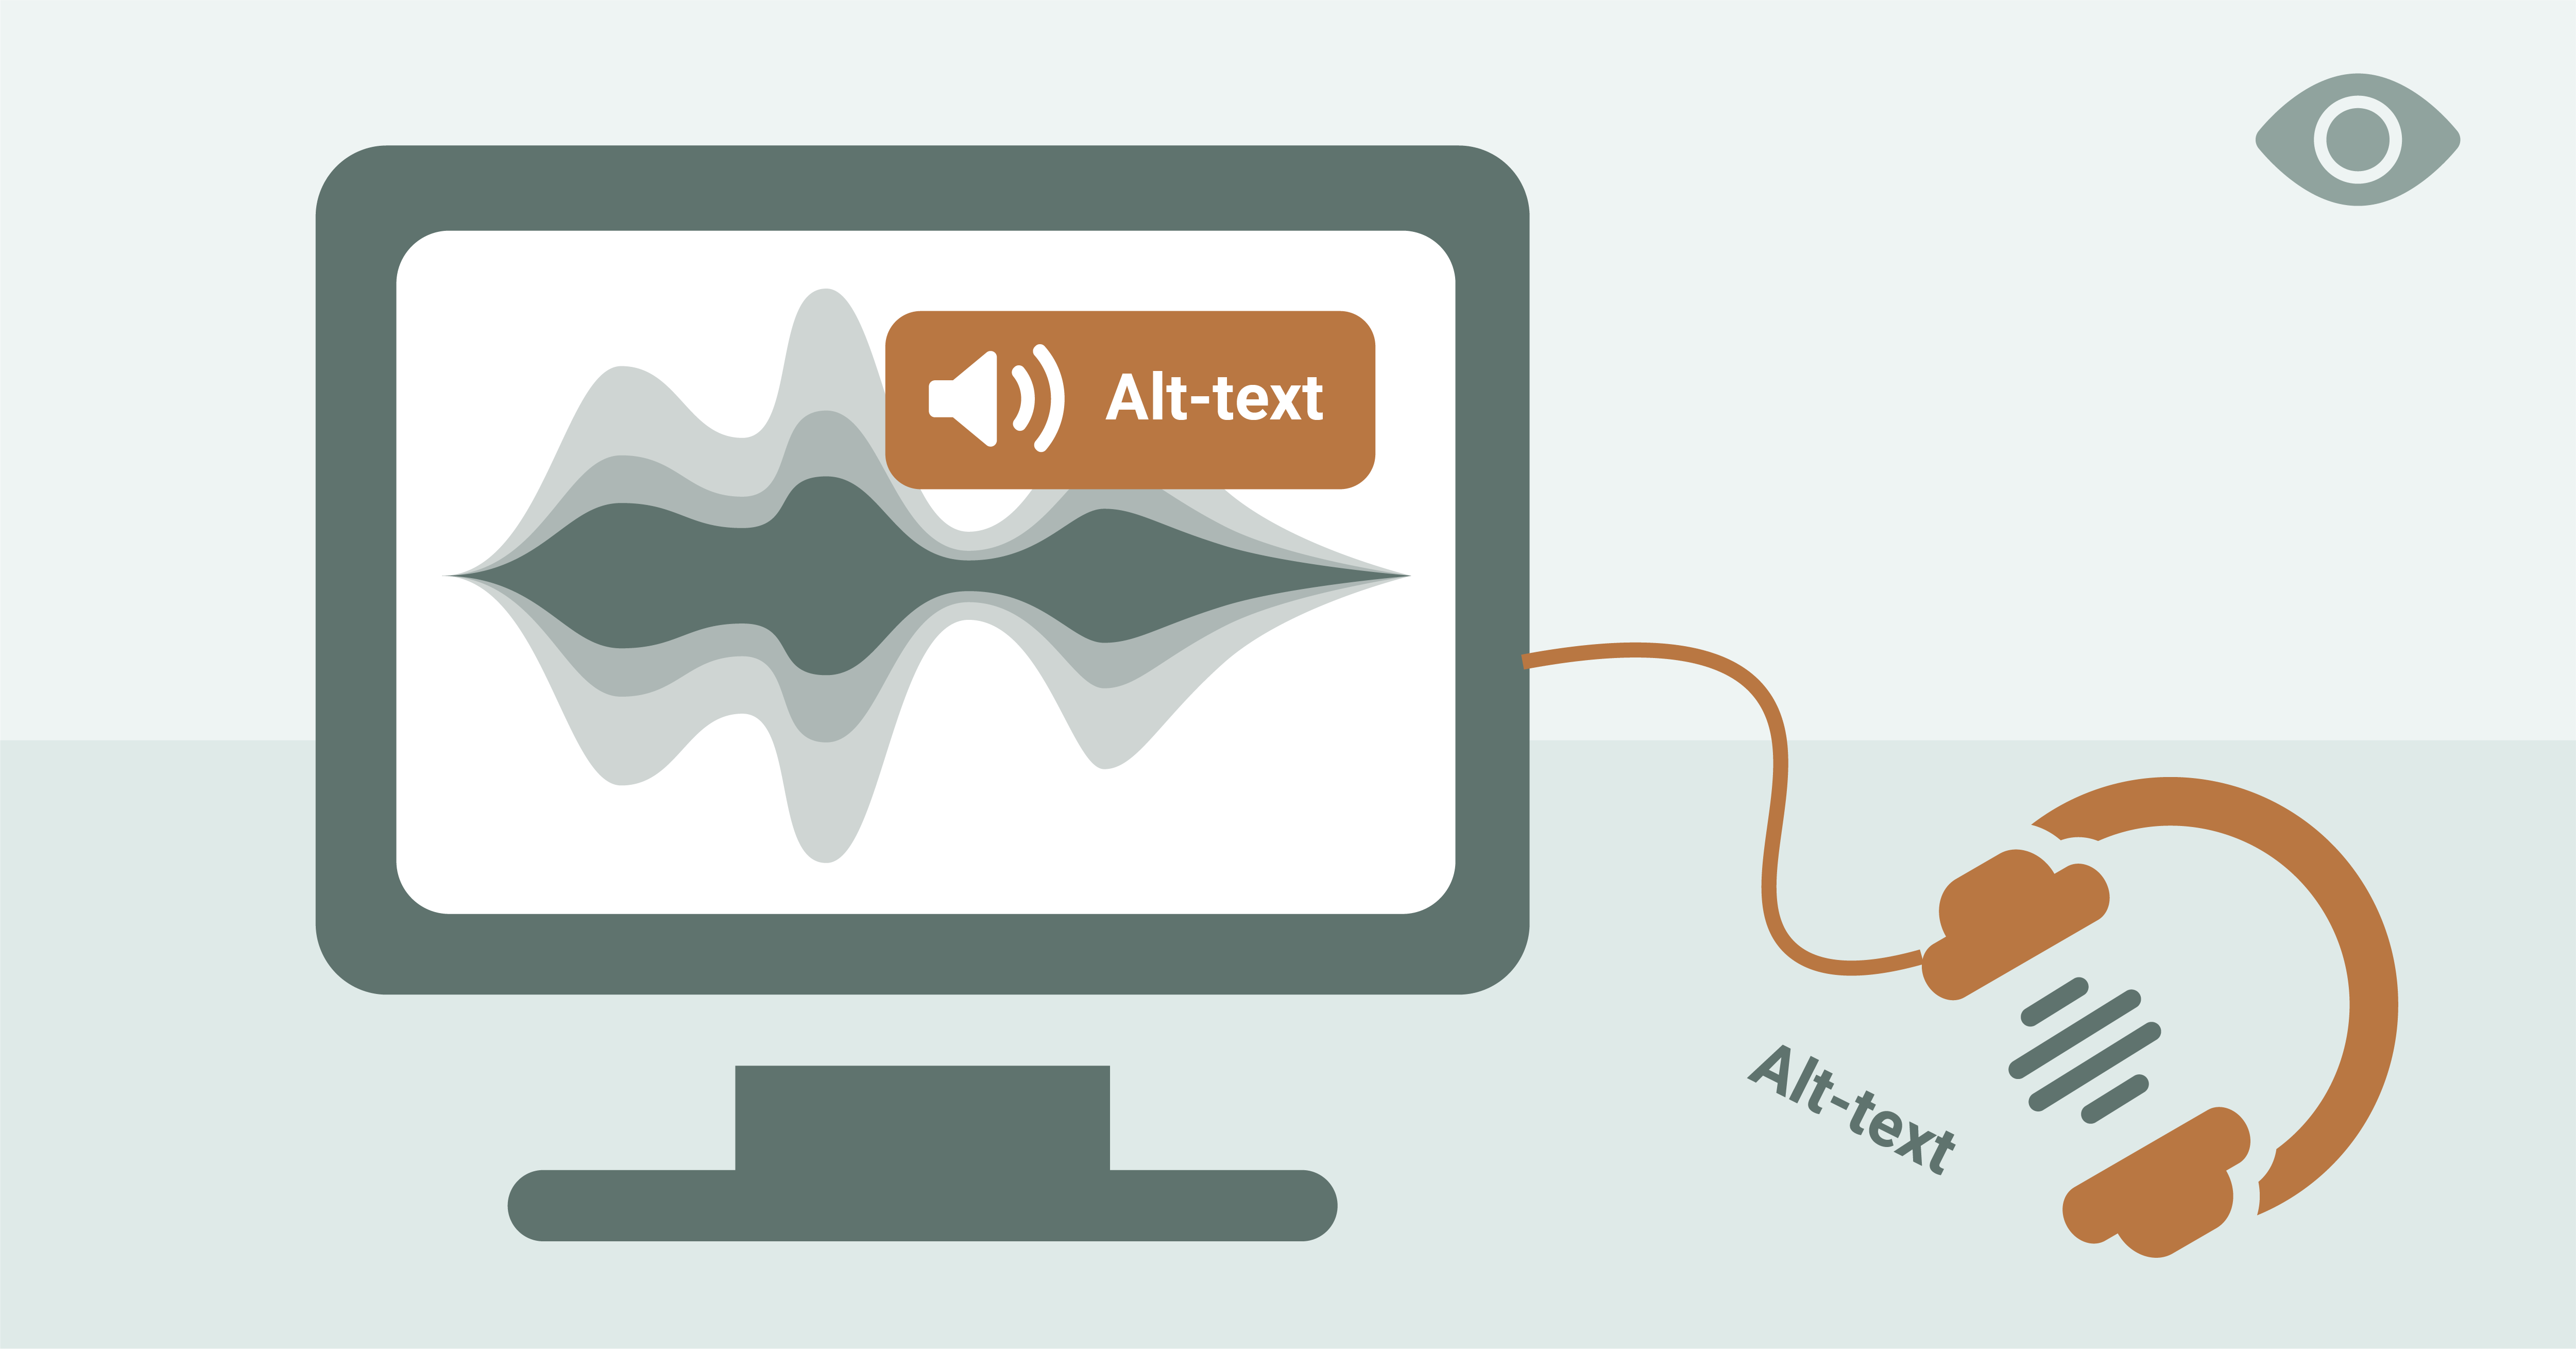 The illustrations shows a computer with a data visualization on screen and a symbol showing the alt text is being read to the reader. A pair of headphones is connected to the computer and the sound being read is being visualizaed with a volume icon.